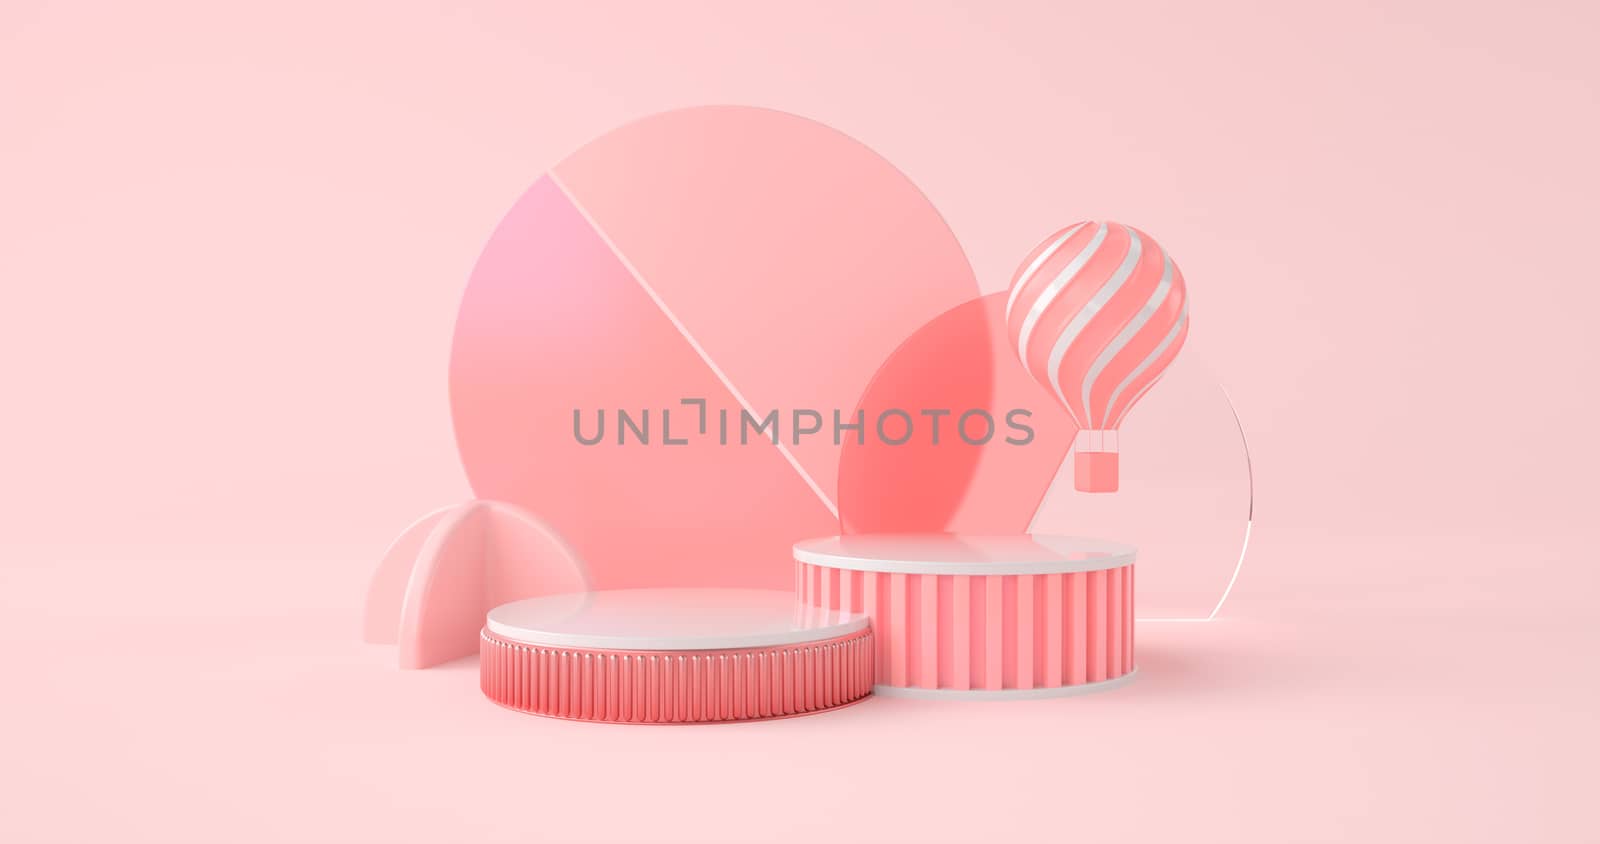 3d rendering of podium and balloon on pink backdrop.
